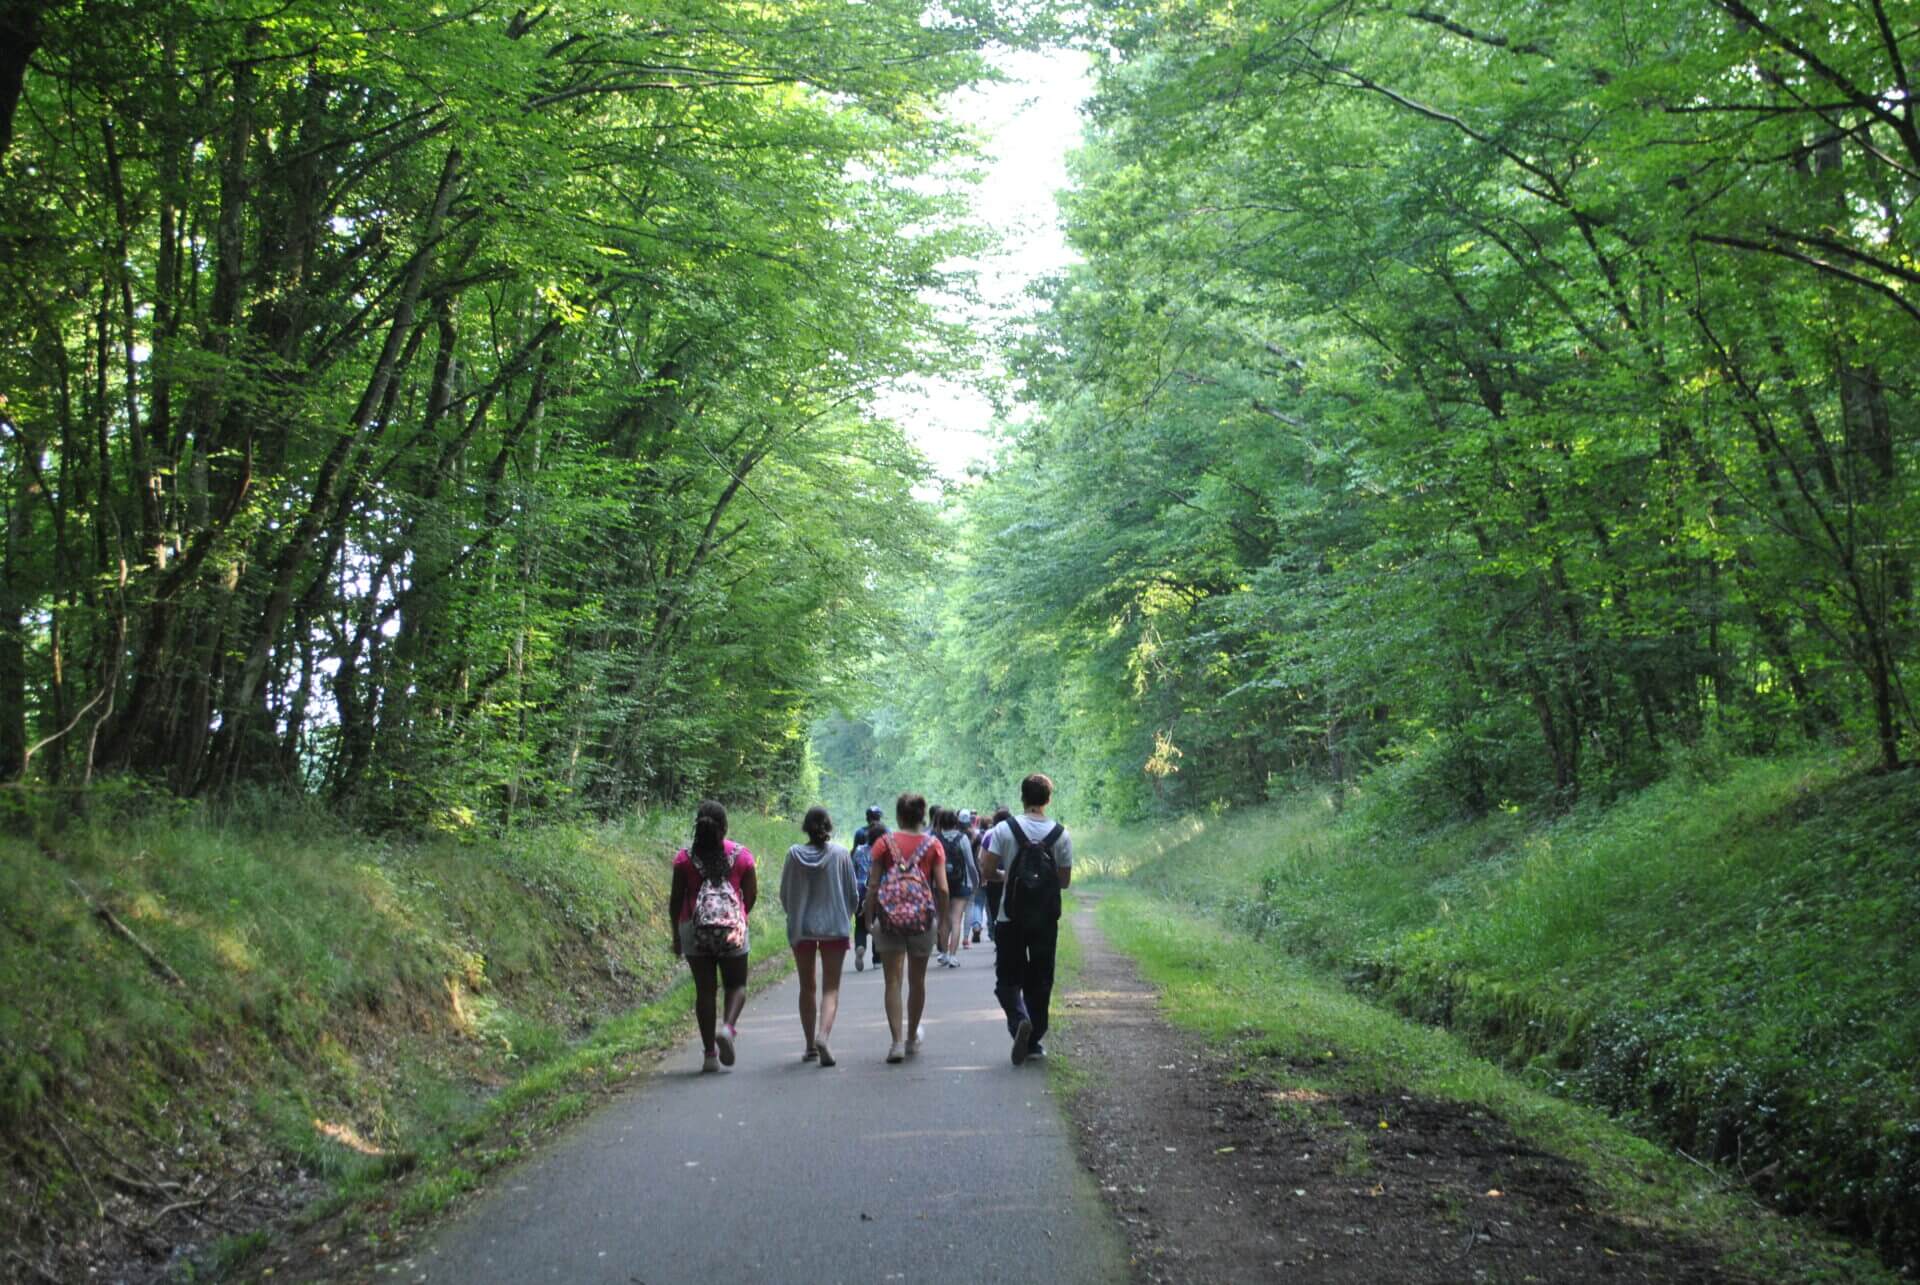 Group of people walking on the road in between the trees